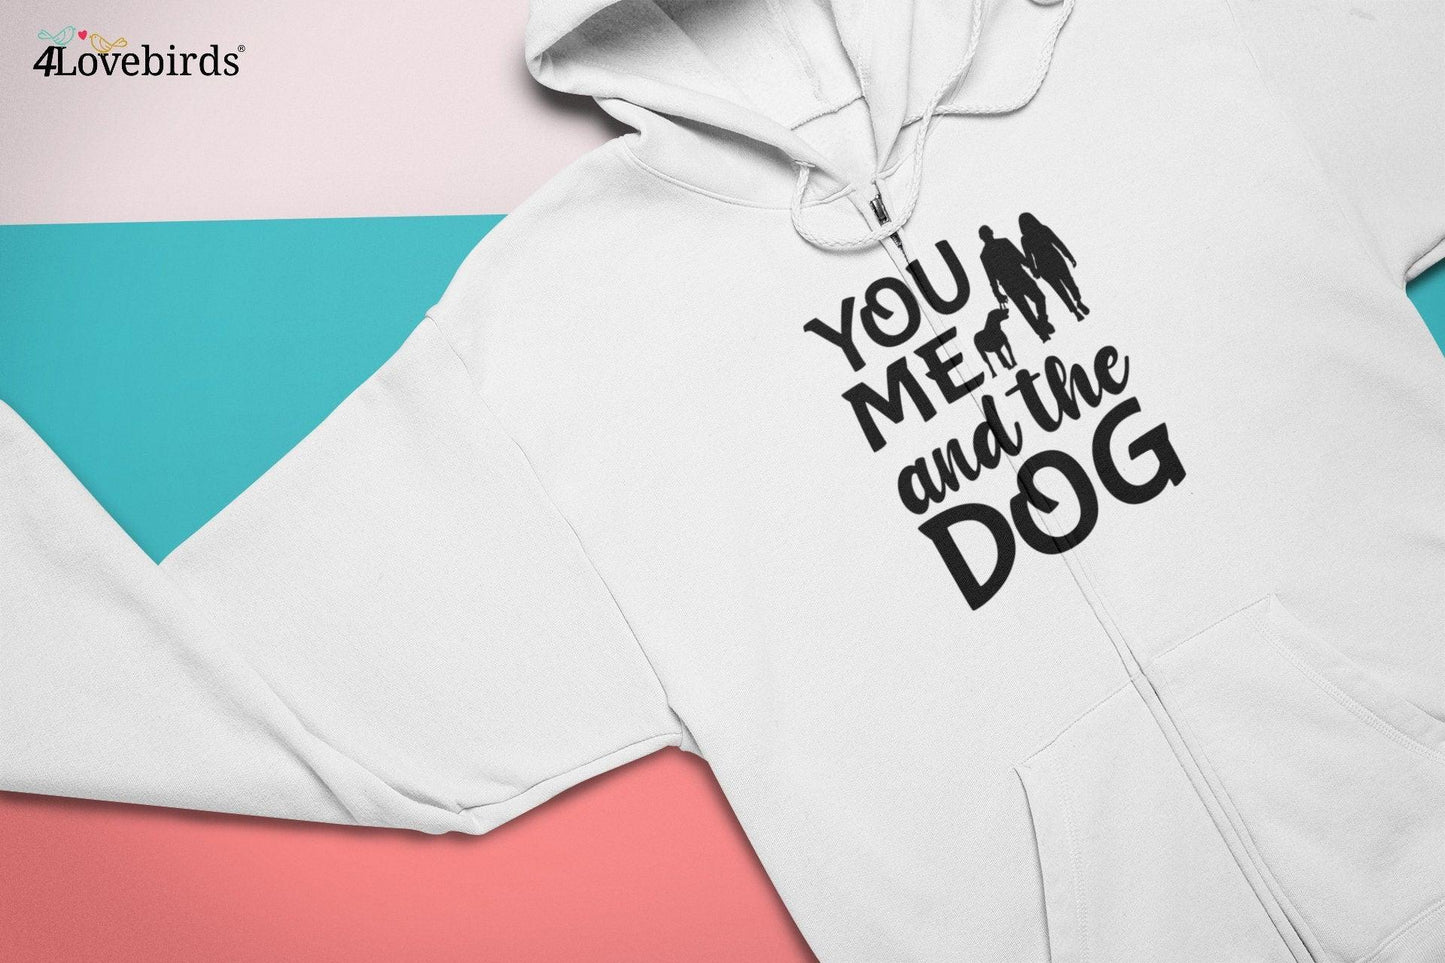 You, me & the Dog Hoodie, matching T-shirt, Gift for Couples, Valentine Sweatshirt, Pet Parents Longsleeve, Husband / Wife, Animal Lovers - 4Lovebirds